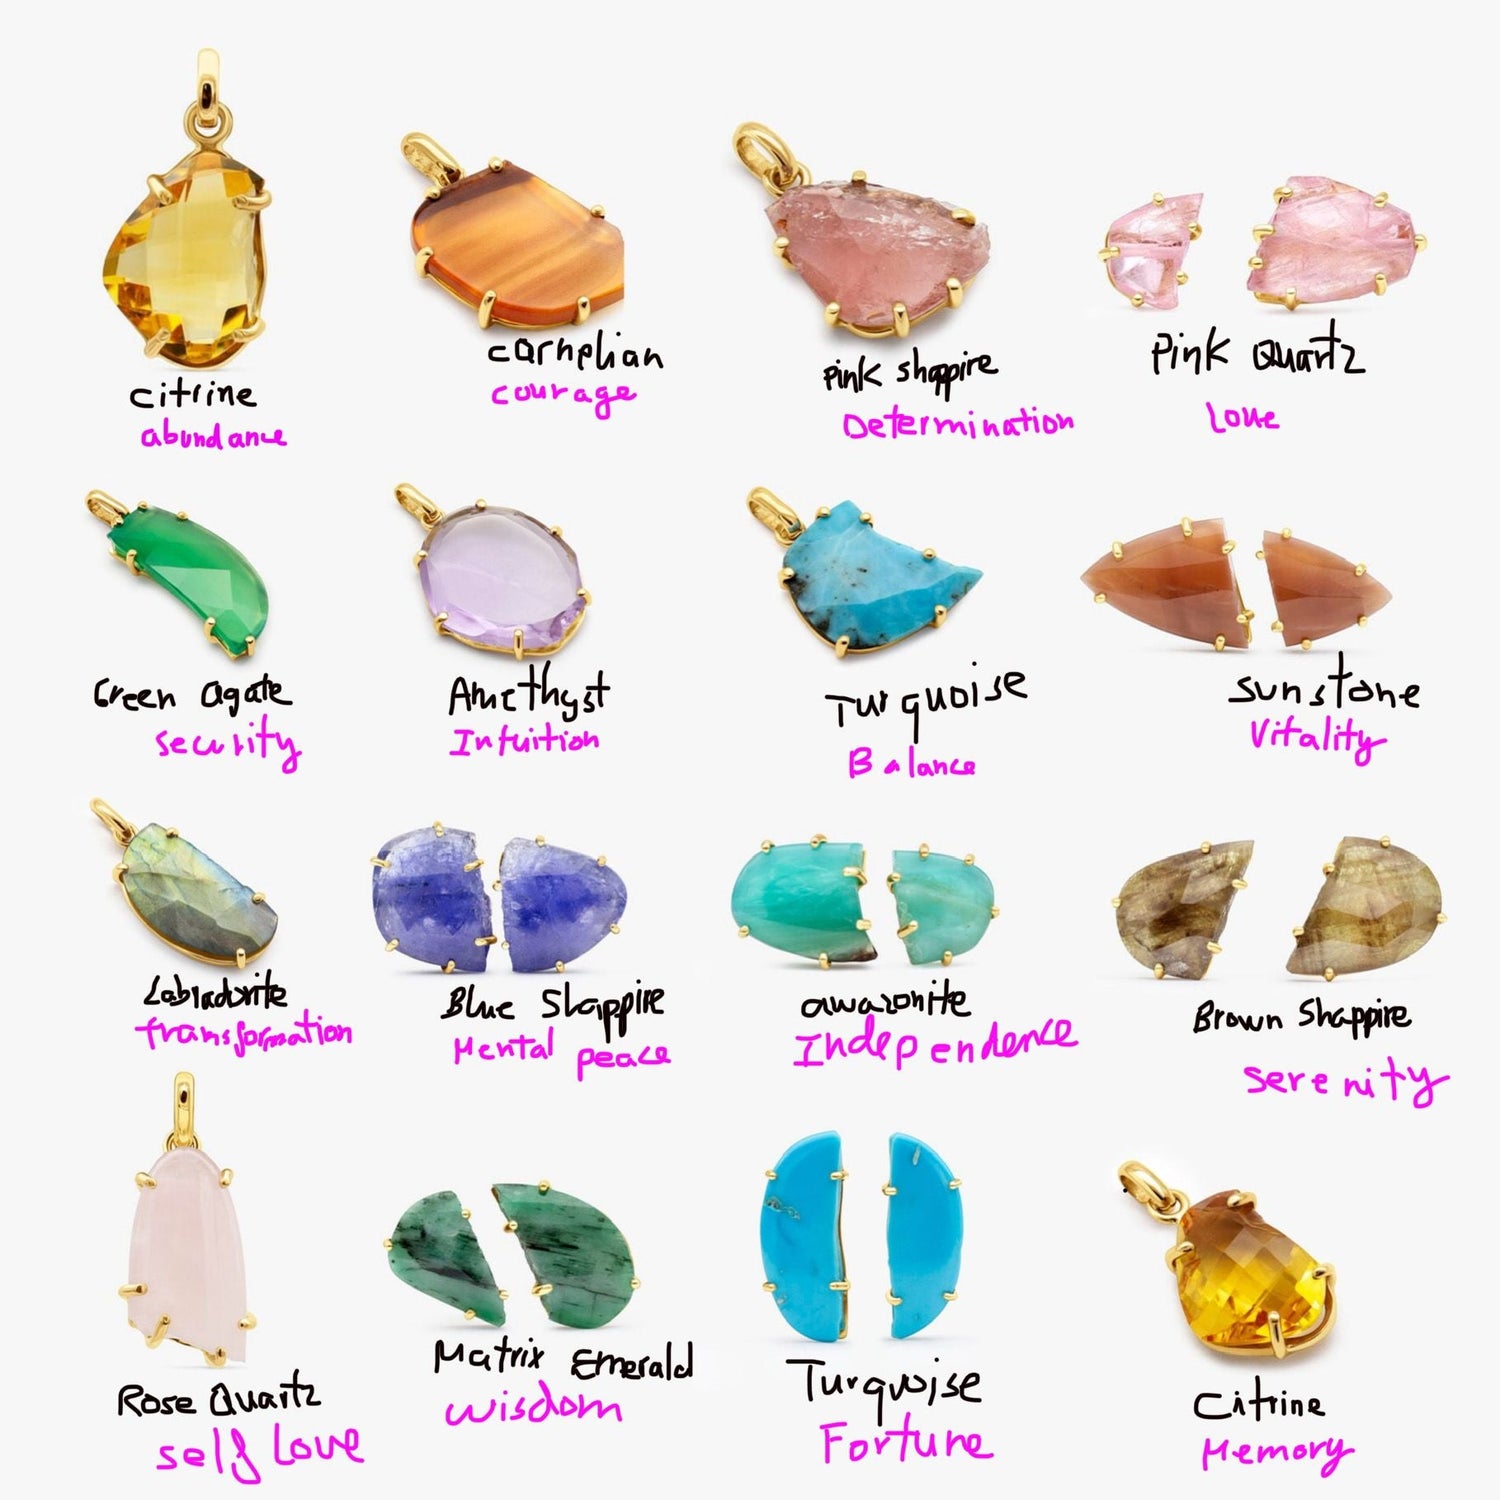 The meaning behind our unique gemstones